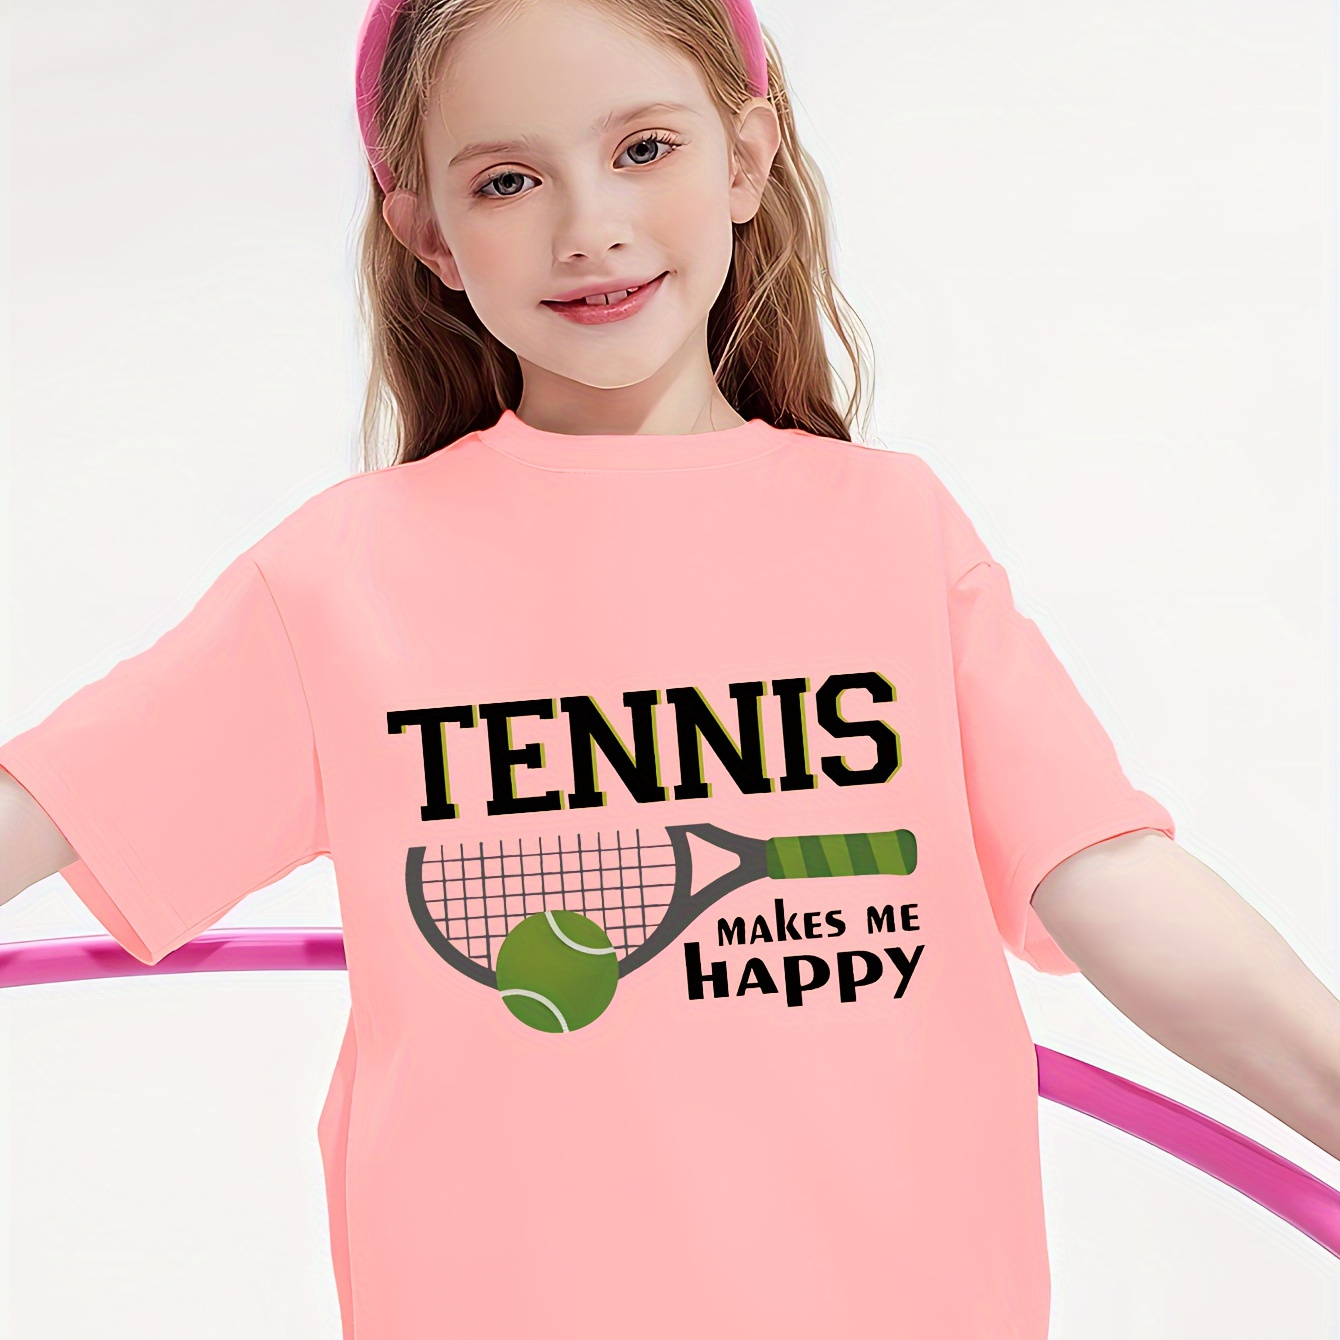 

Tennis Makes Me Happy Graphic, Versatile 95% Cotton T-shirt For Girls Summer Sports Gift